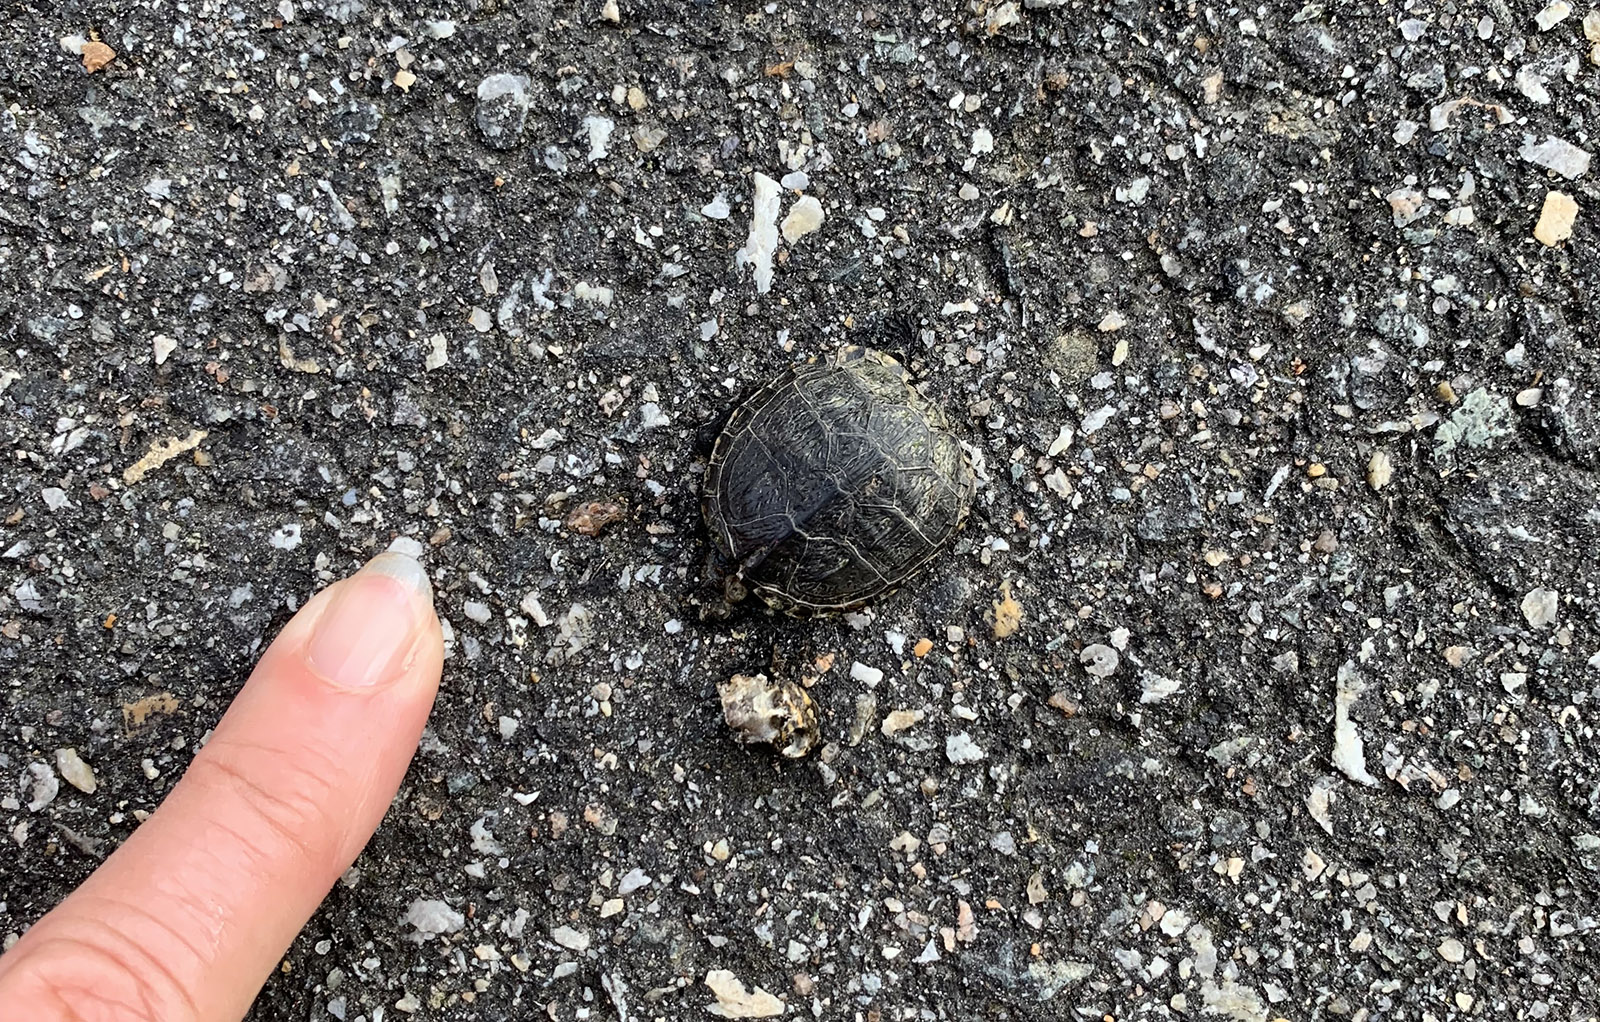 A photo of a tiny turtle on a paved road pictured next to a person's finger, showing that the turtle hatchling is barely bigger then the end of the finger.